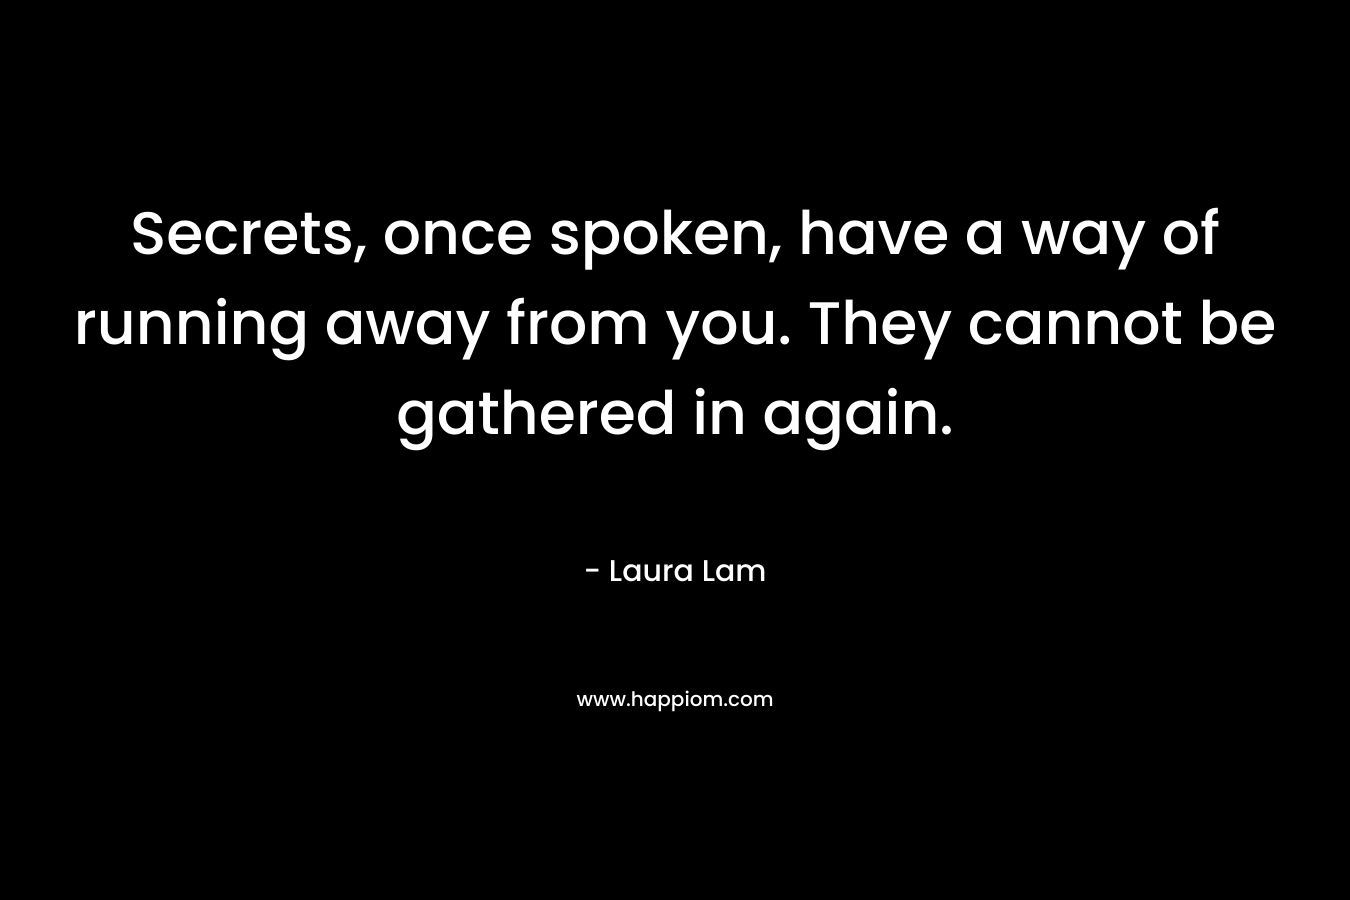 Secrets, once spoken, have a way of running away from you. They cannot be gathered in again. – Laura Lam